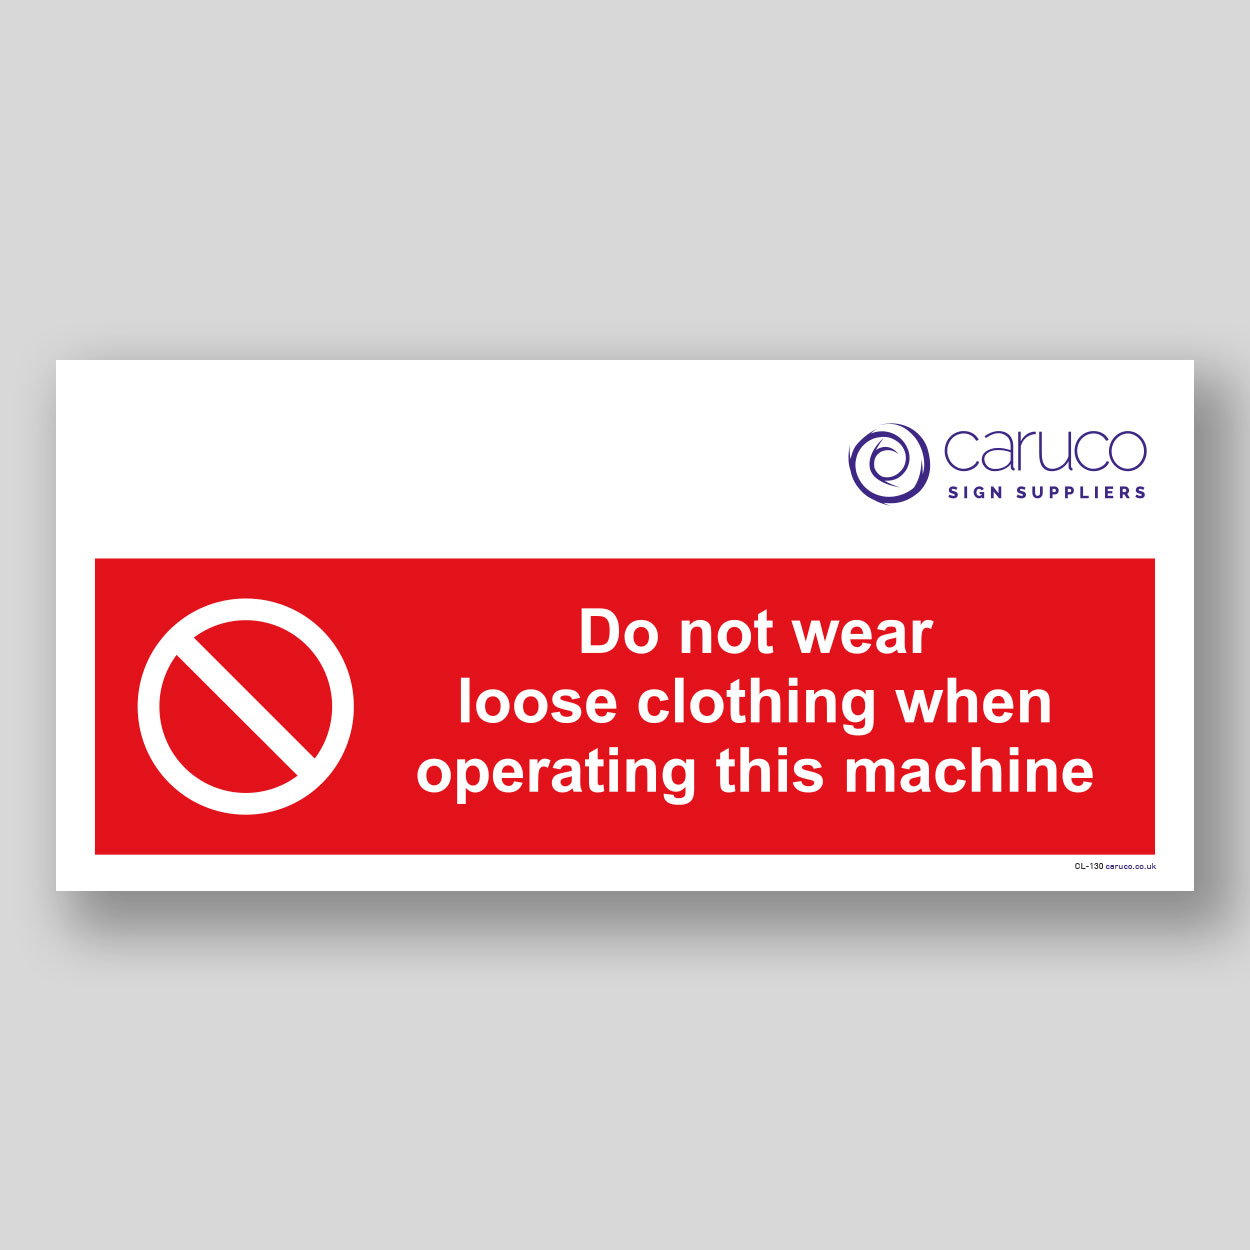 CL-130 Do not wear loose clothing when operating machine